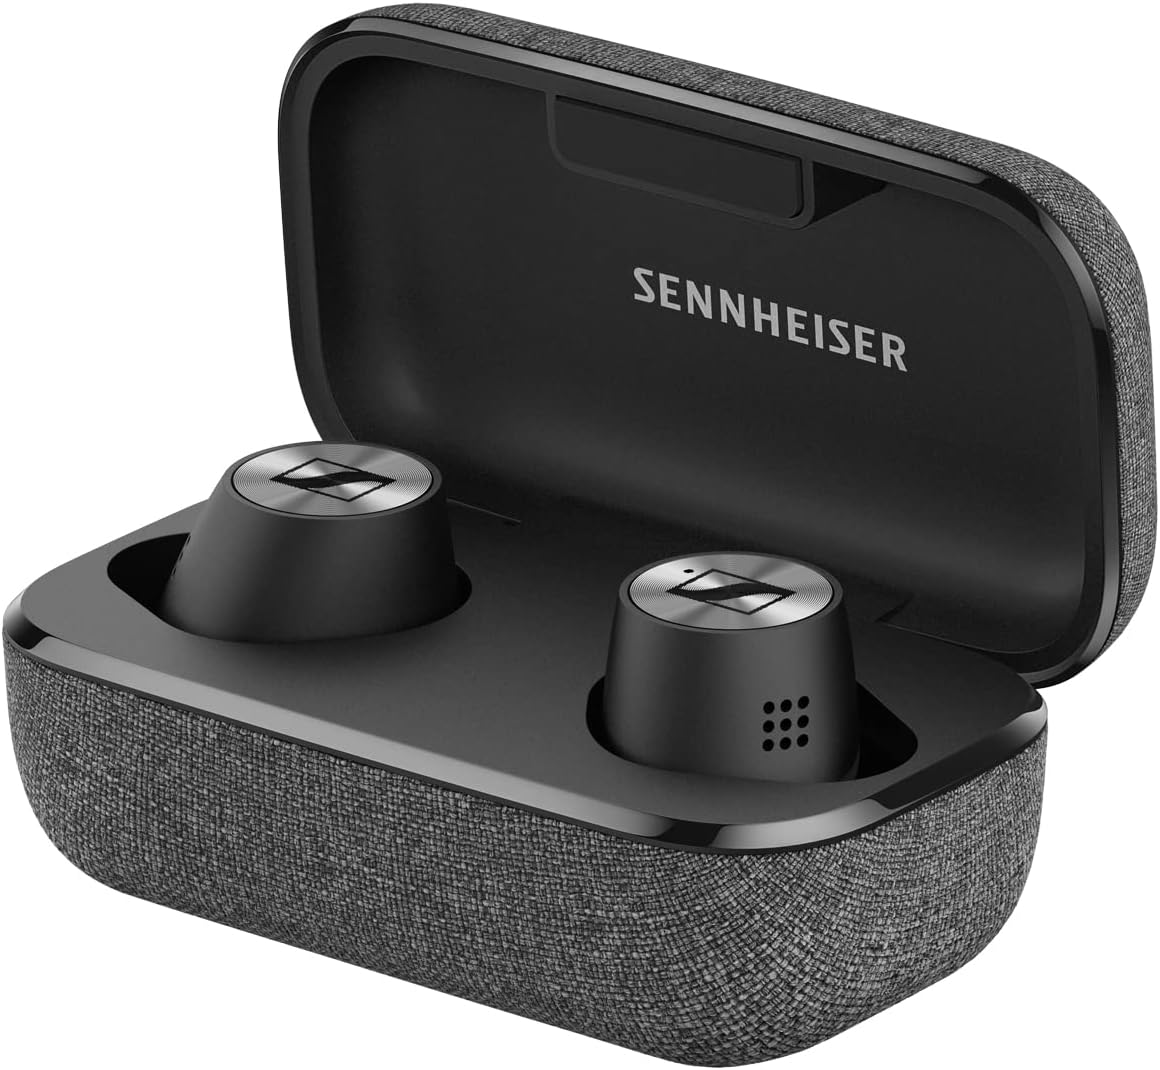 Sennheiser Consumer Audio Momentum True Wireless 2 Bluetooth in Ear Buds with Active Noise Cancellation